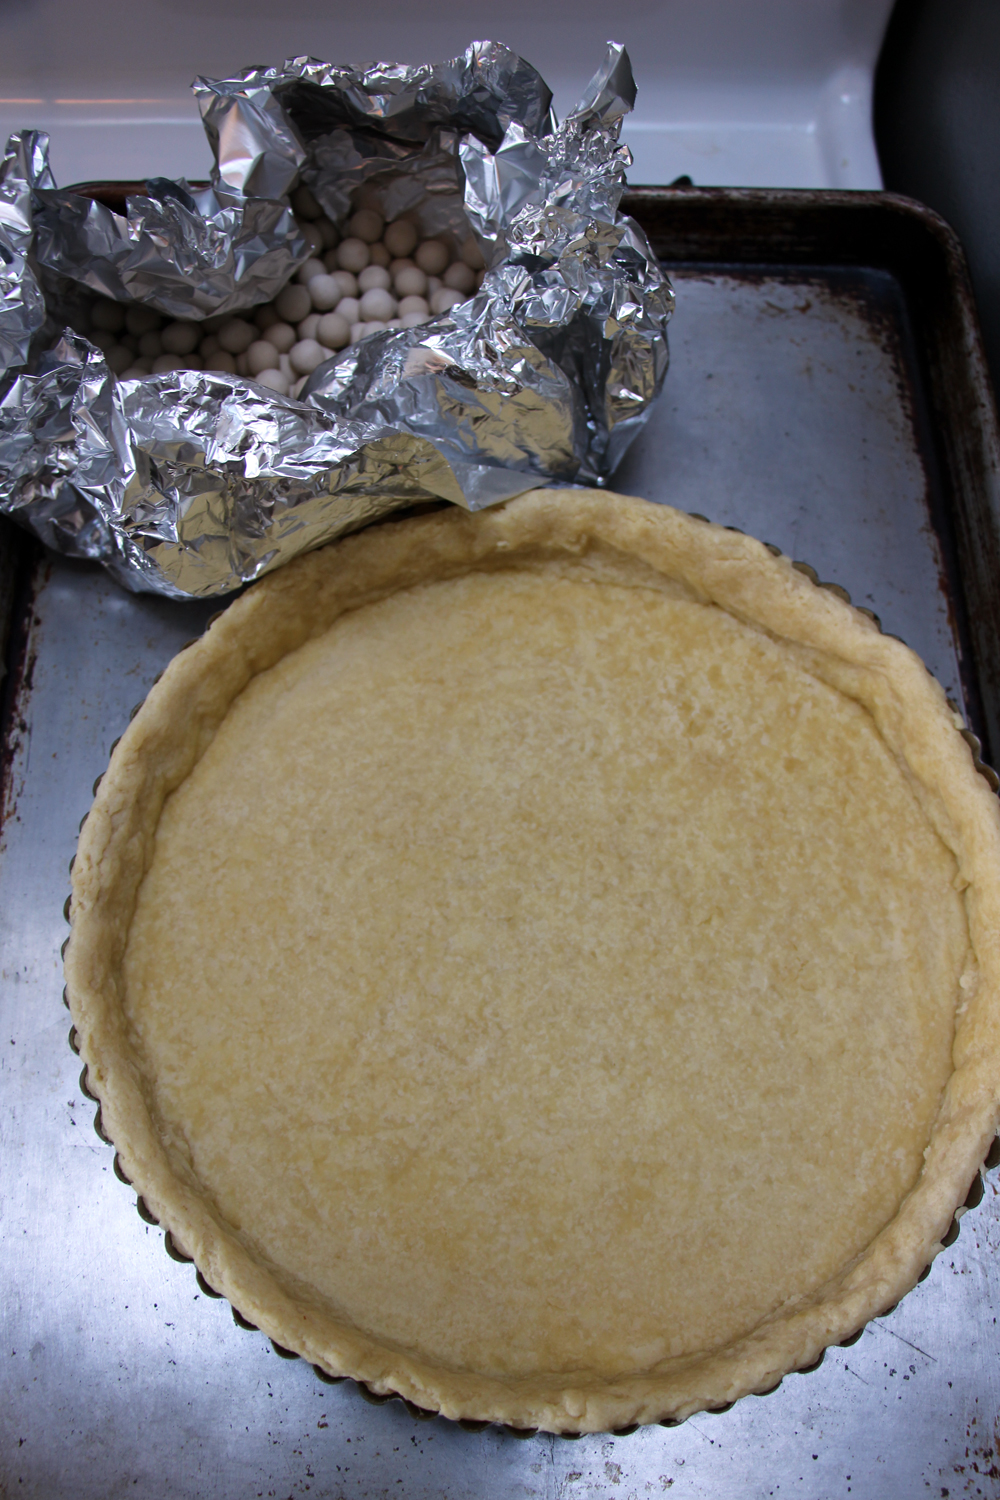 Bake until the crust looks dry, about 20 minutes. Remove the foil and weights and set aside while you prepare the filling. Reduce the oven temperature to 350°F. Photo: Wendy Goodfriend